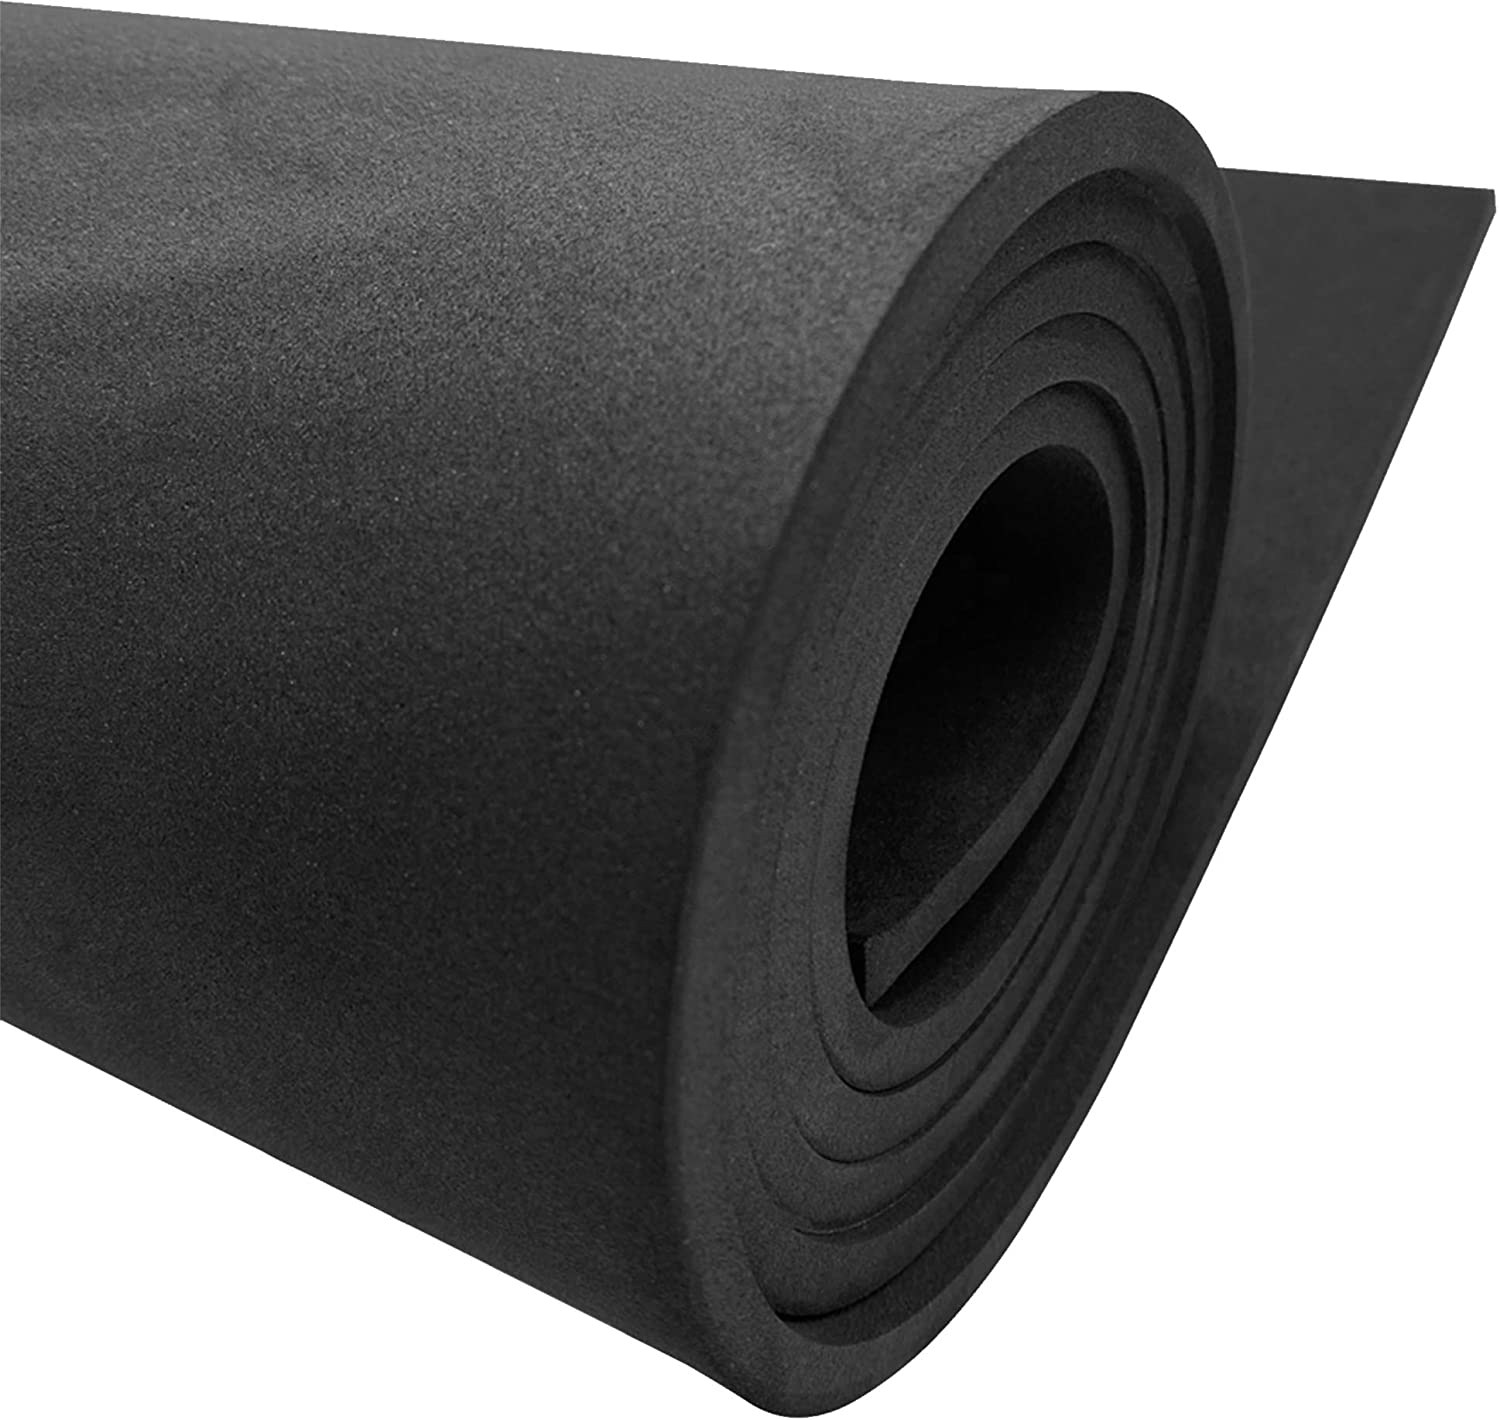 Foam Padding Sheet 4 Inch Long X 4 Inch Wide X 1/4 Thick Thin Foam With  Adhes